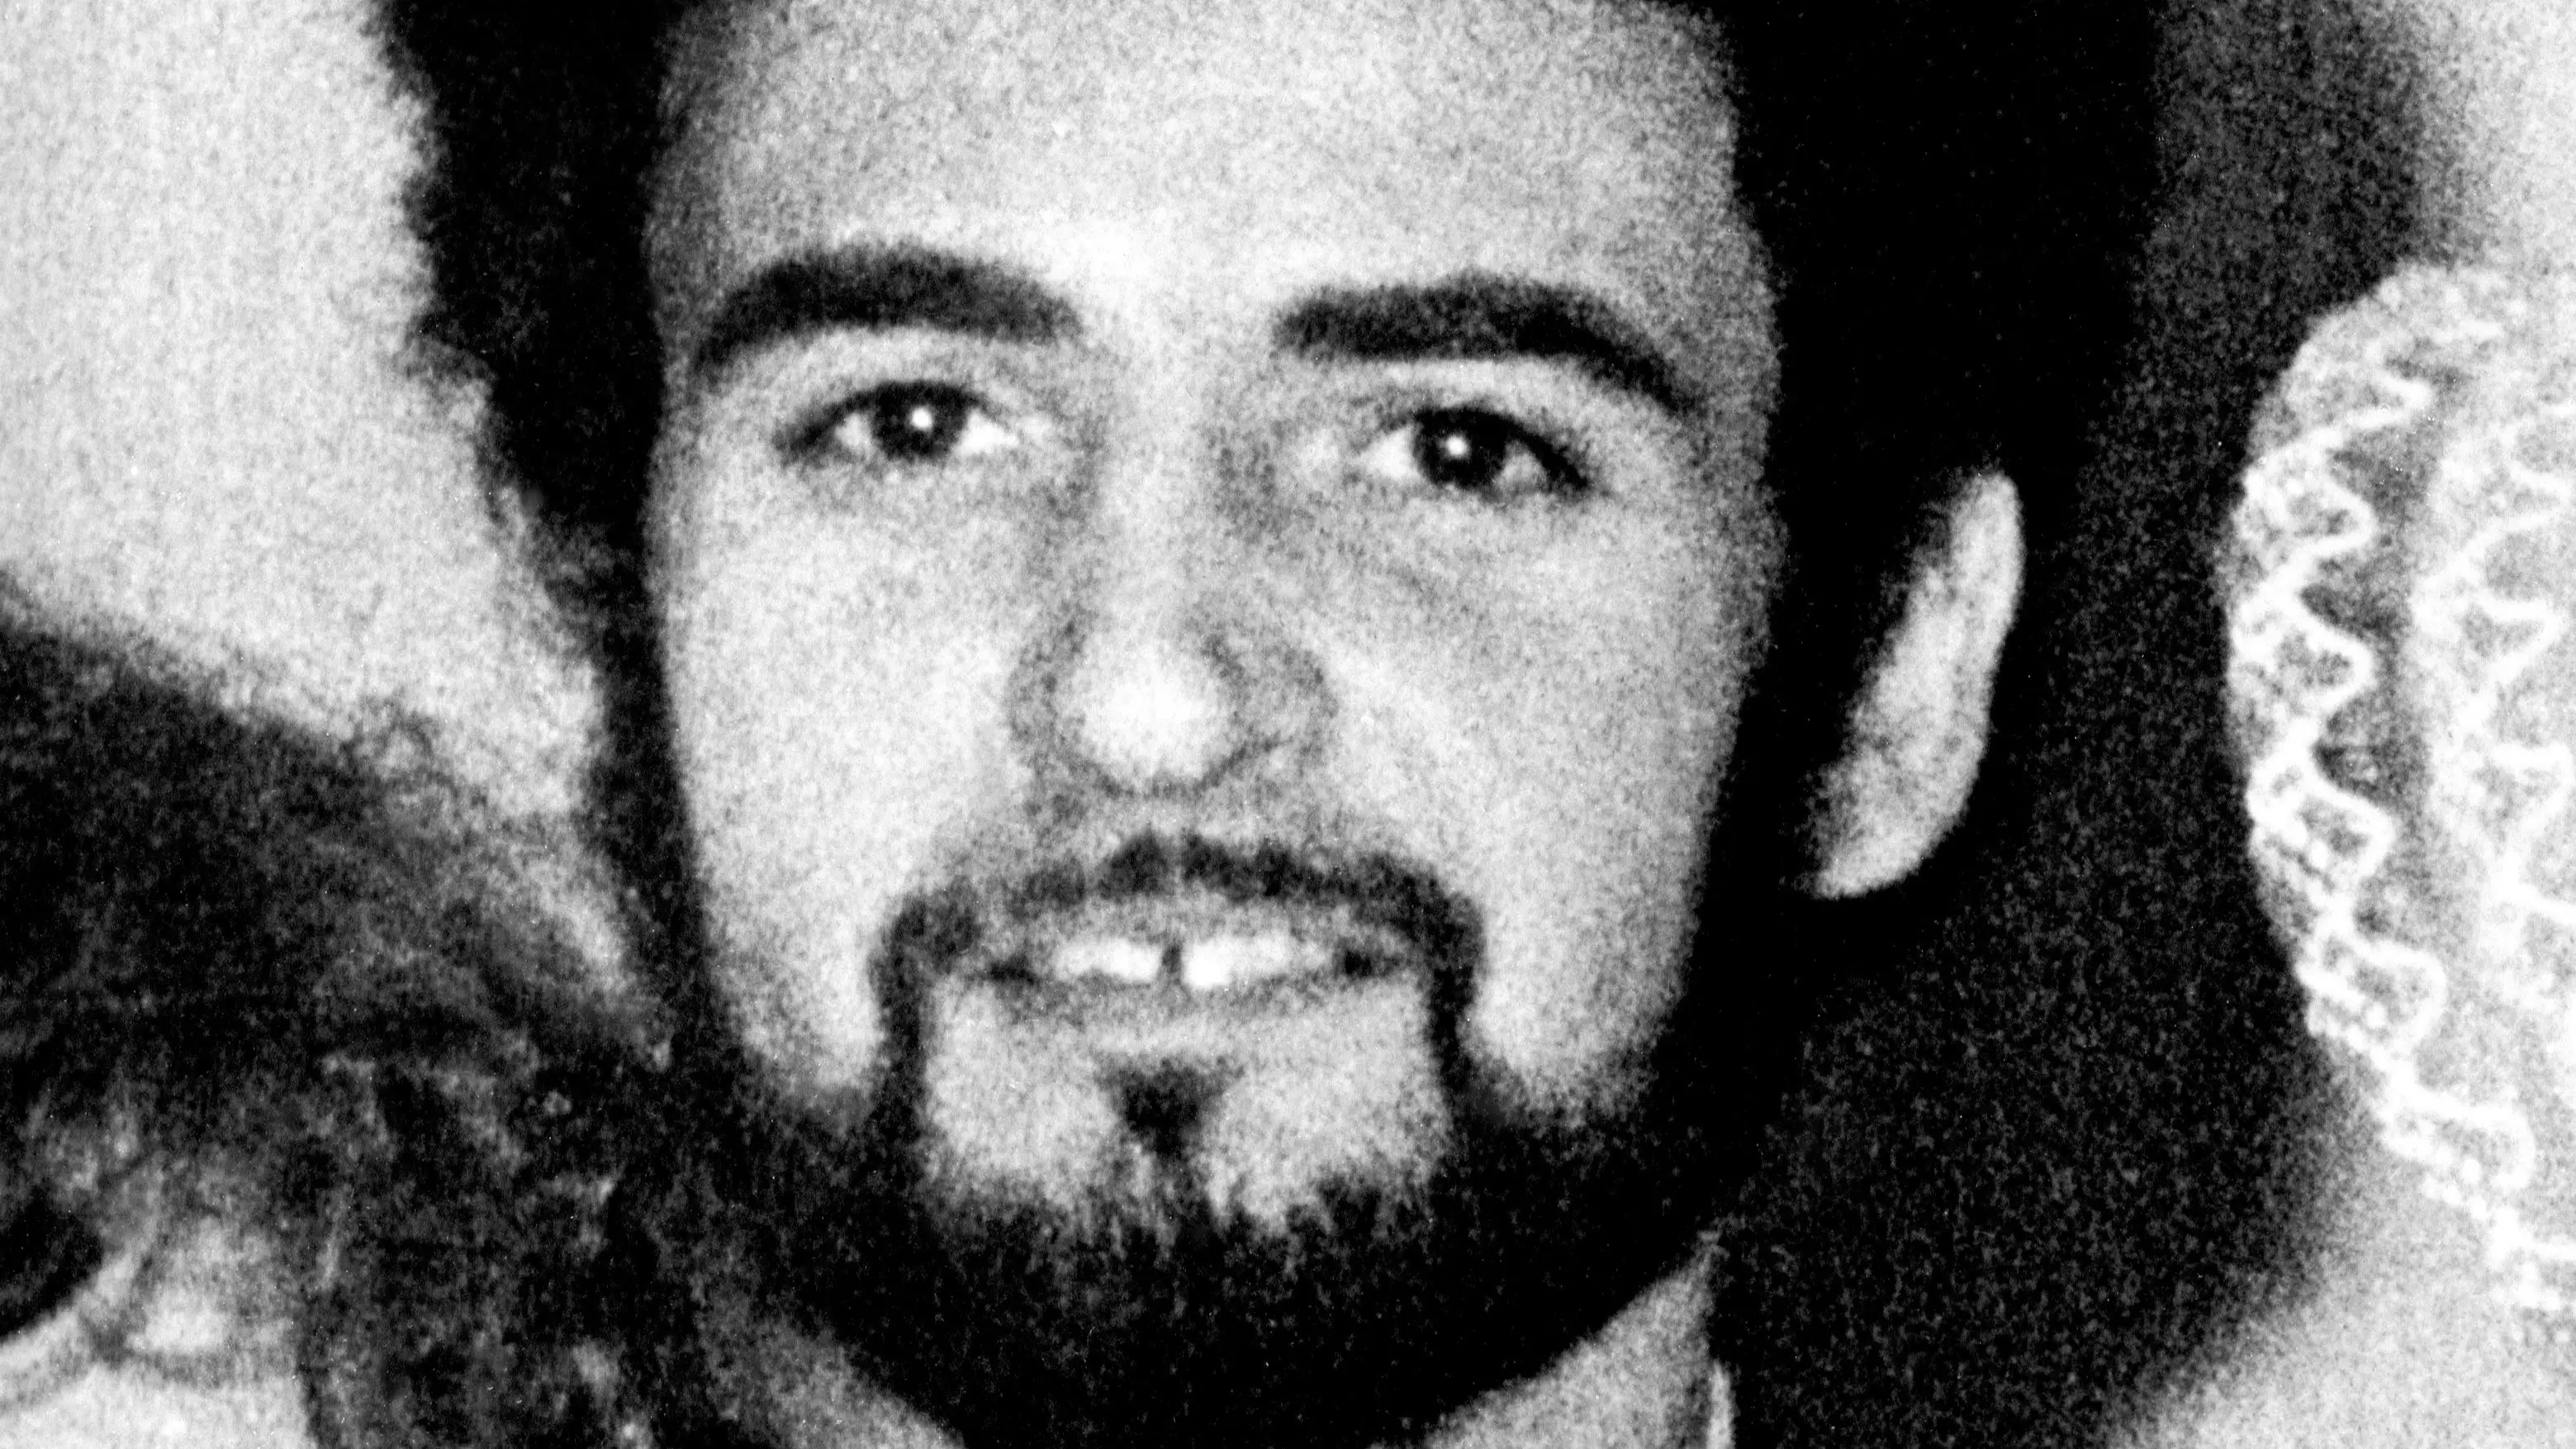 True Crime Series About The Yorkshire Ripper Is Reportedly Coming To Netflix